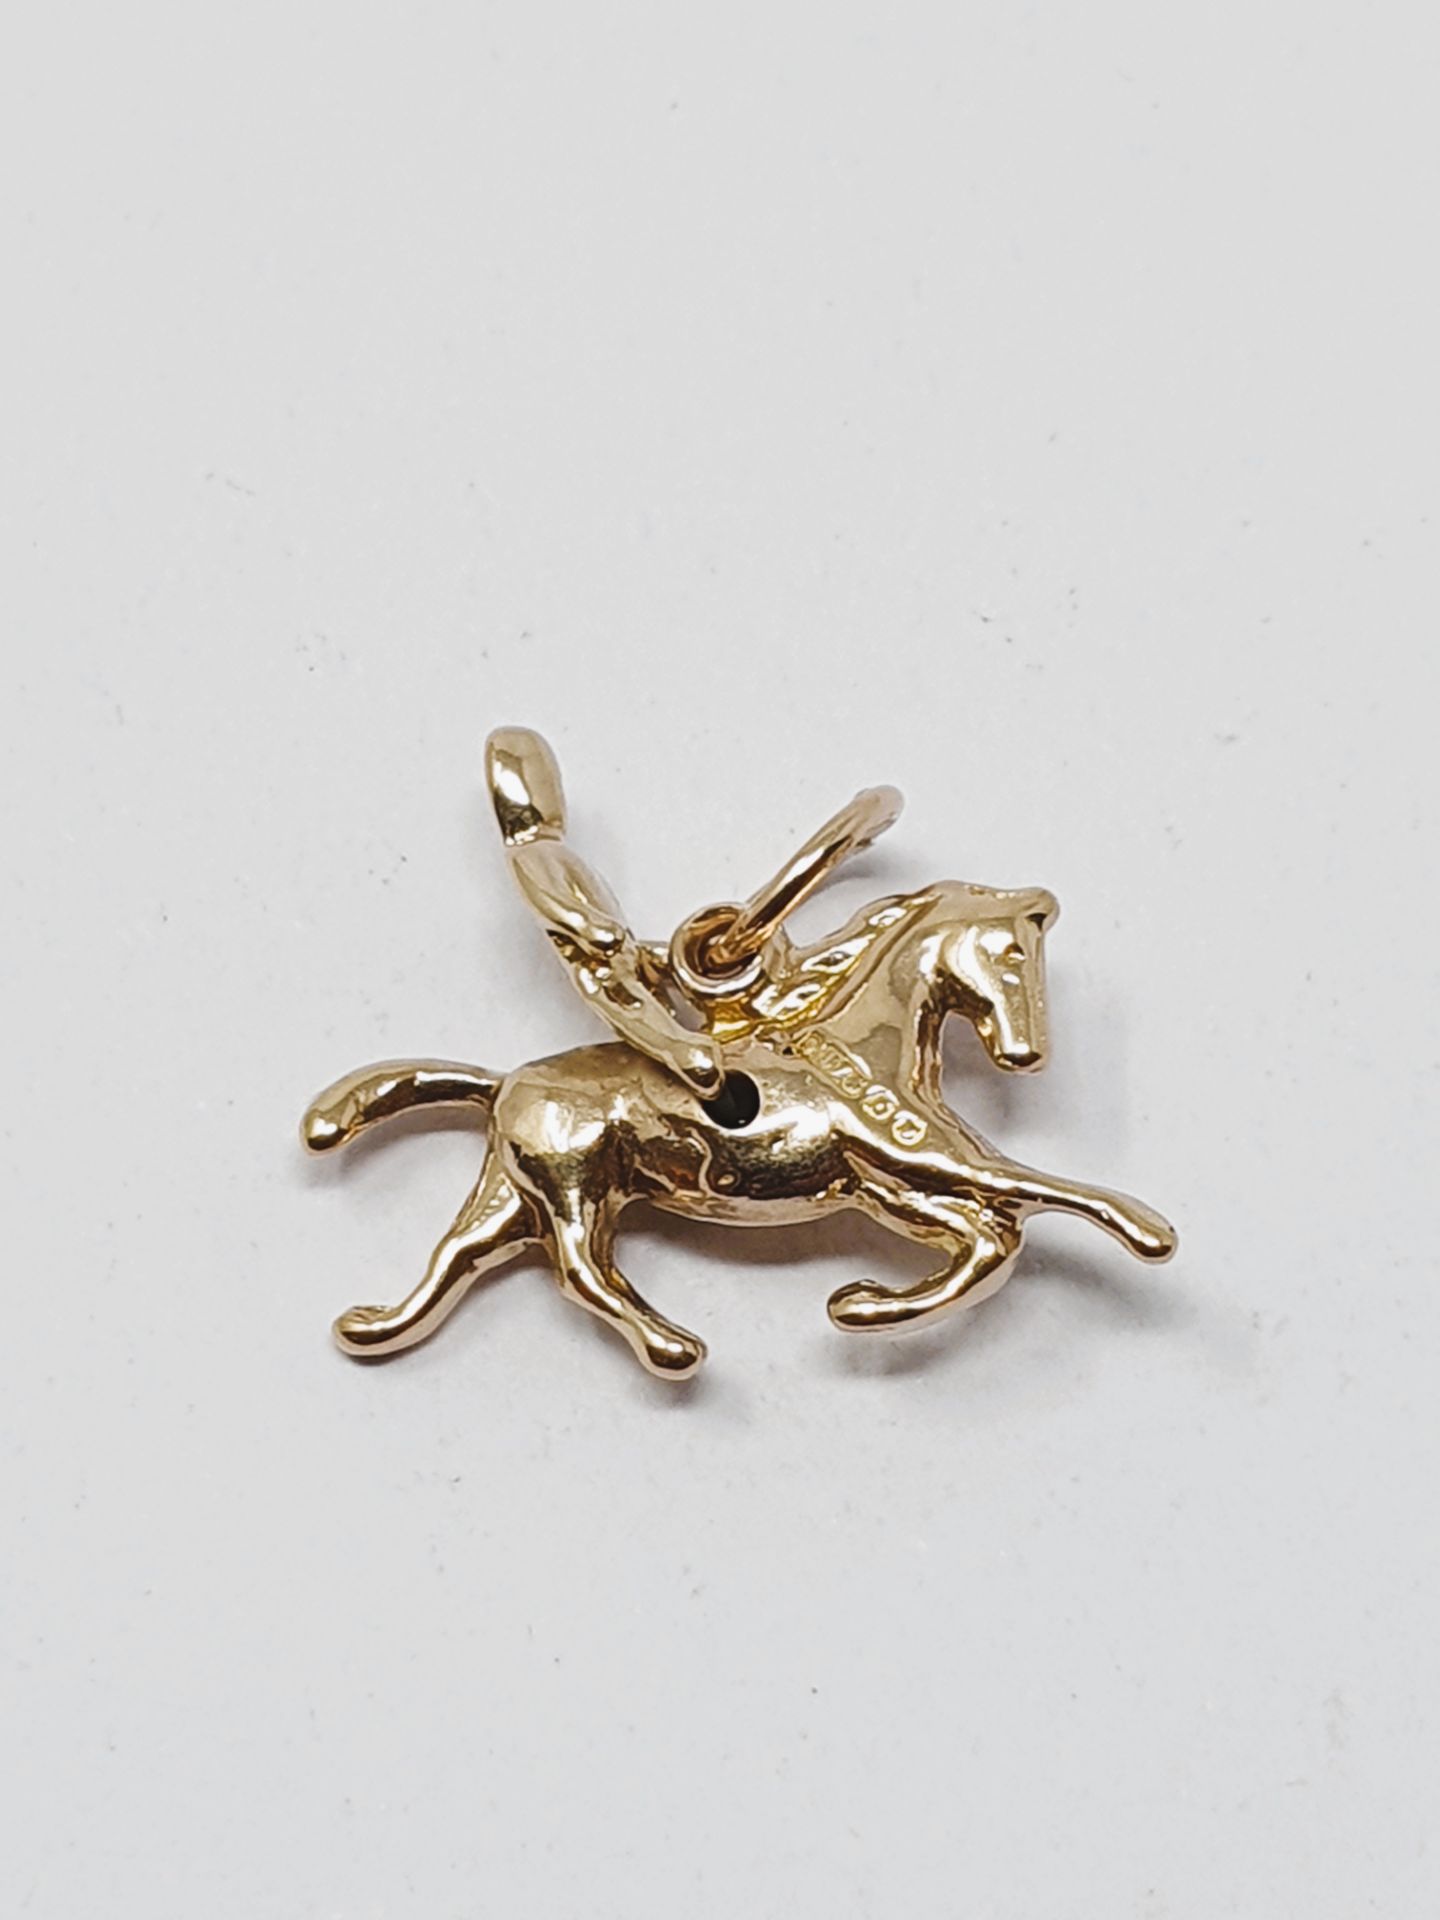 9ct gold vintage galloping horse with rider charm, gross weight 2. - Image 2 of 2